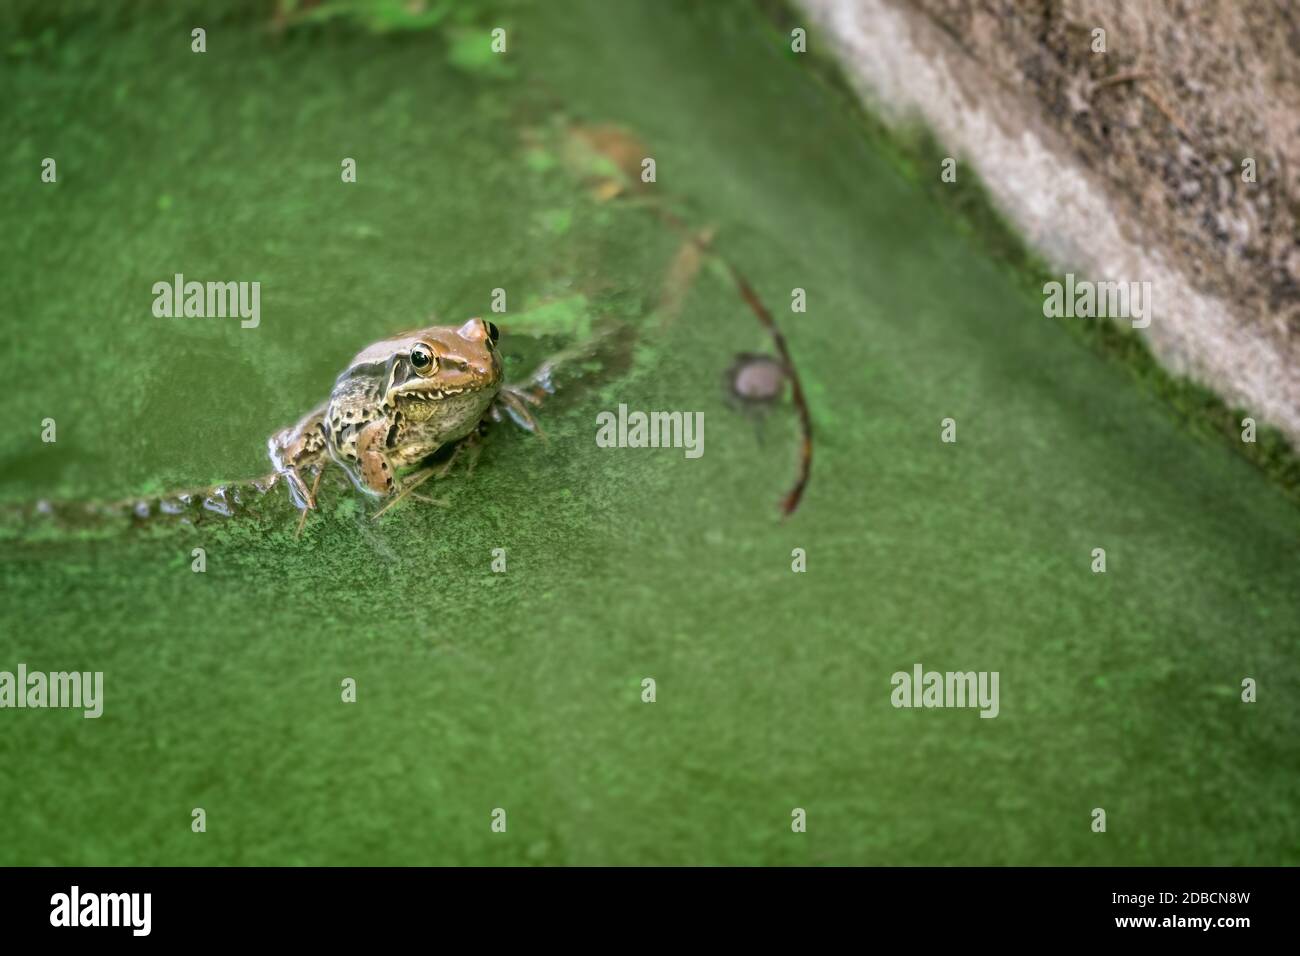 A closeup shot of a small frog by the edge of a pond full of moss Stock Photo